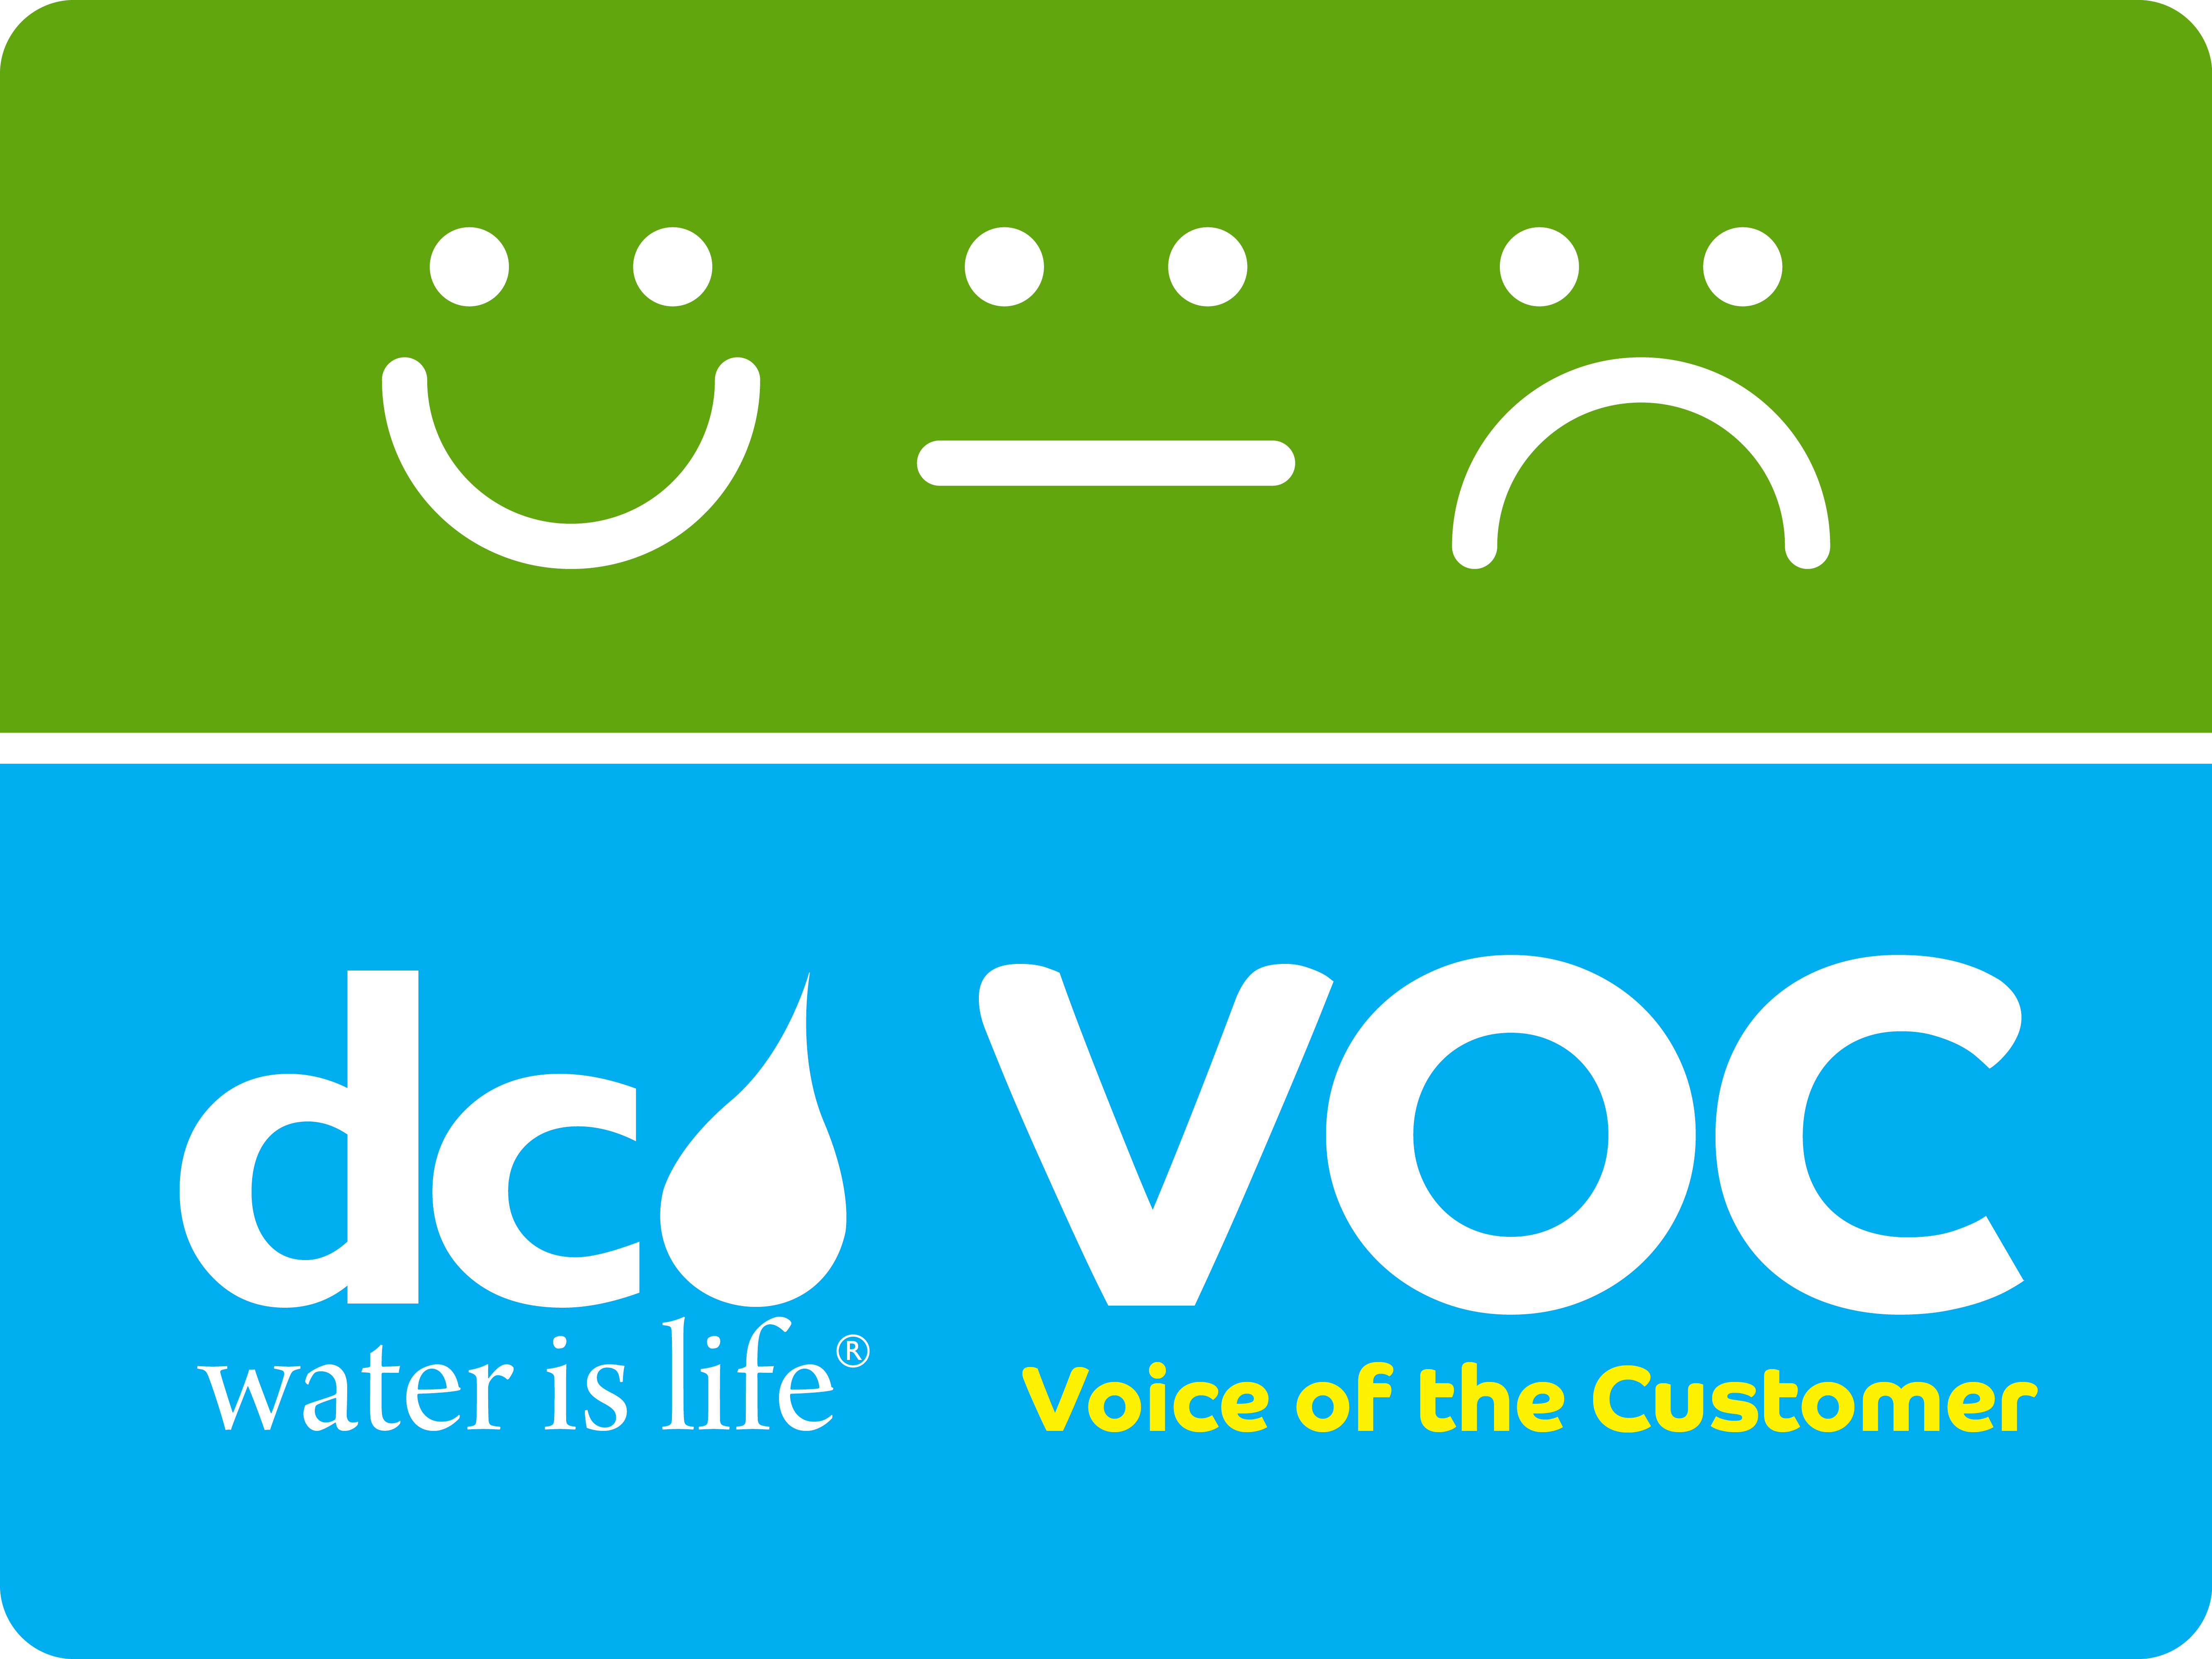 Graphic with three emoji faces: smile, neutral and frown. DC Water logo and Voice of the Customer graphic are also included.